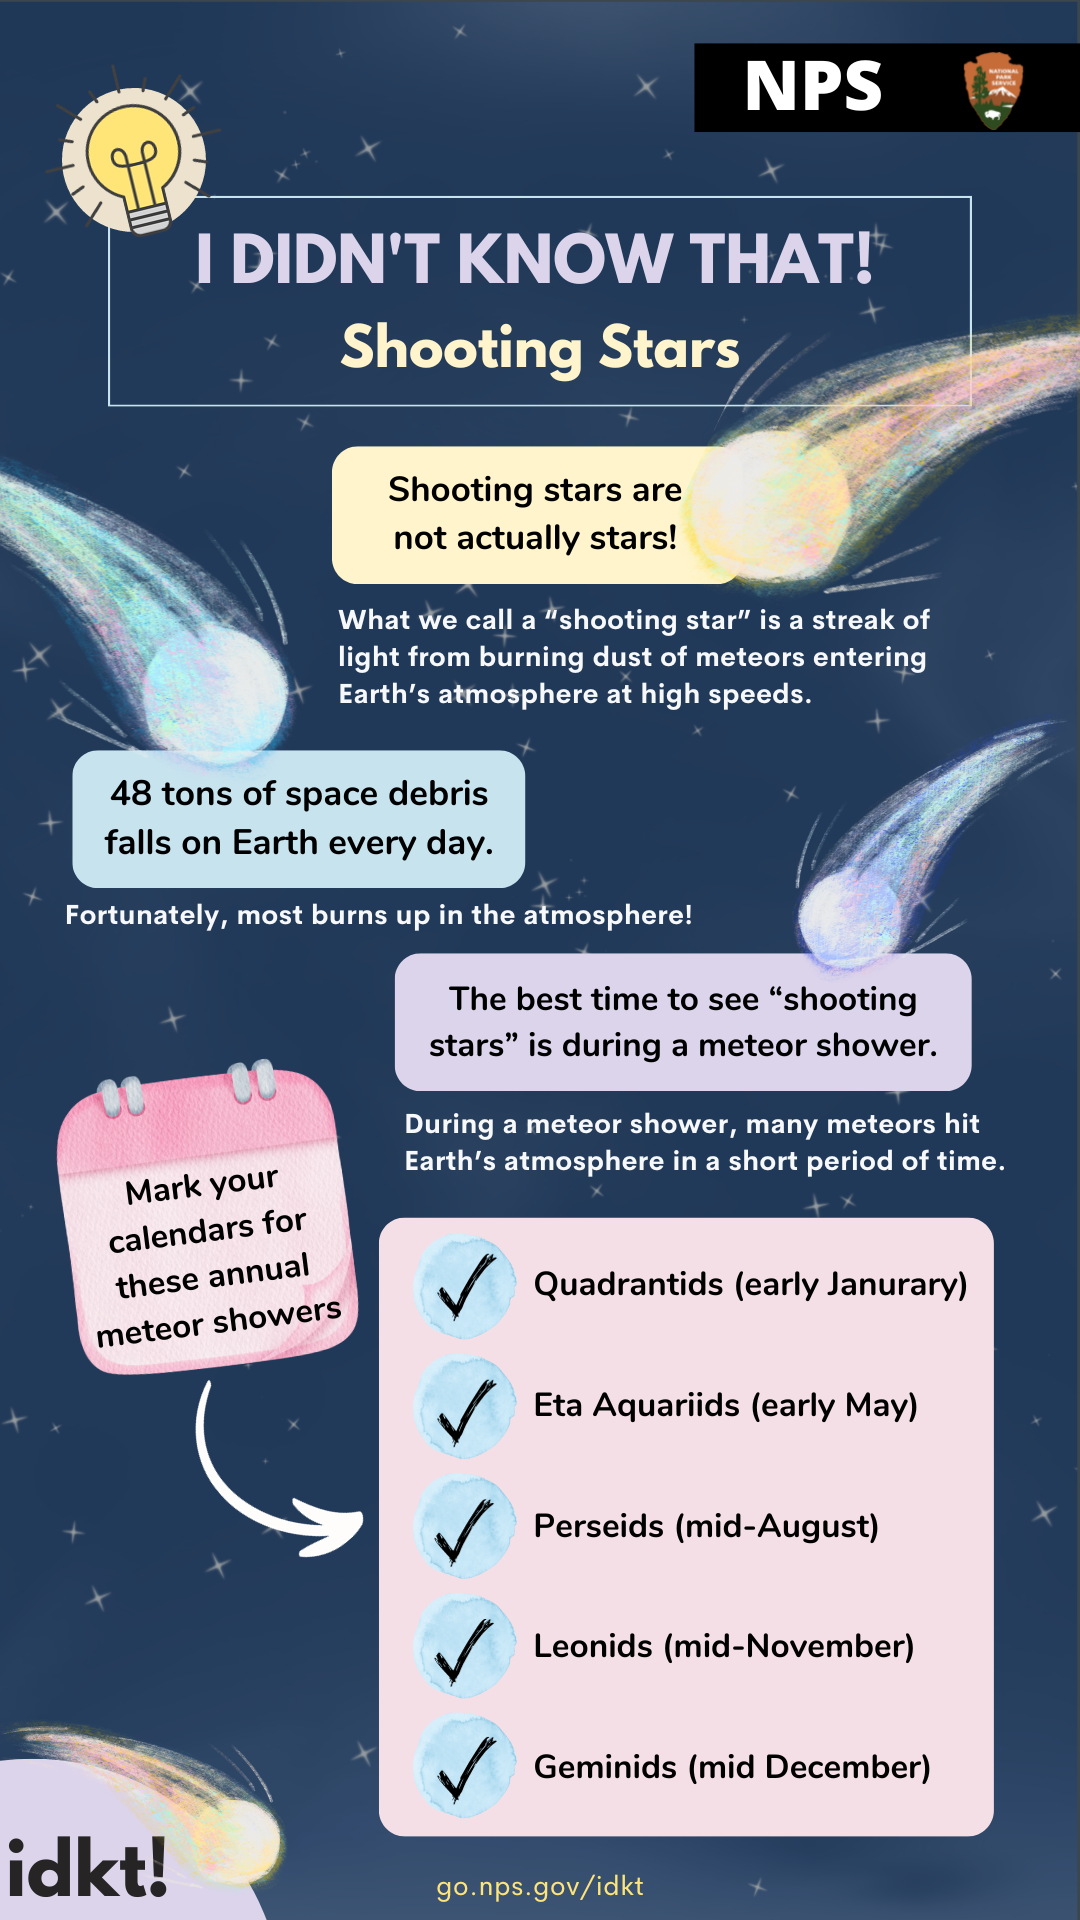 An infographic with title "I Didn't Know That! Shooting Stars" full alt text available below the image